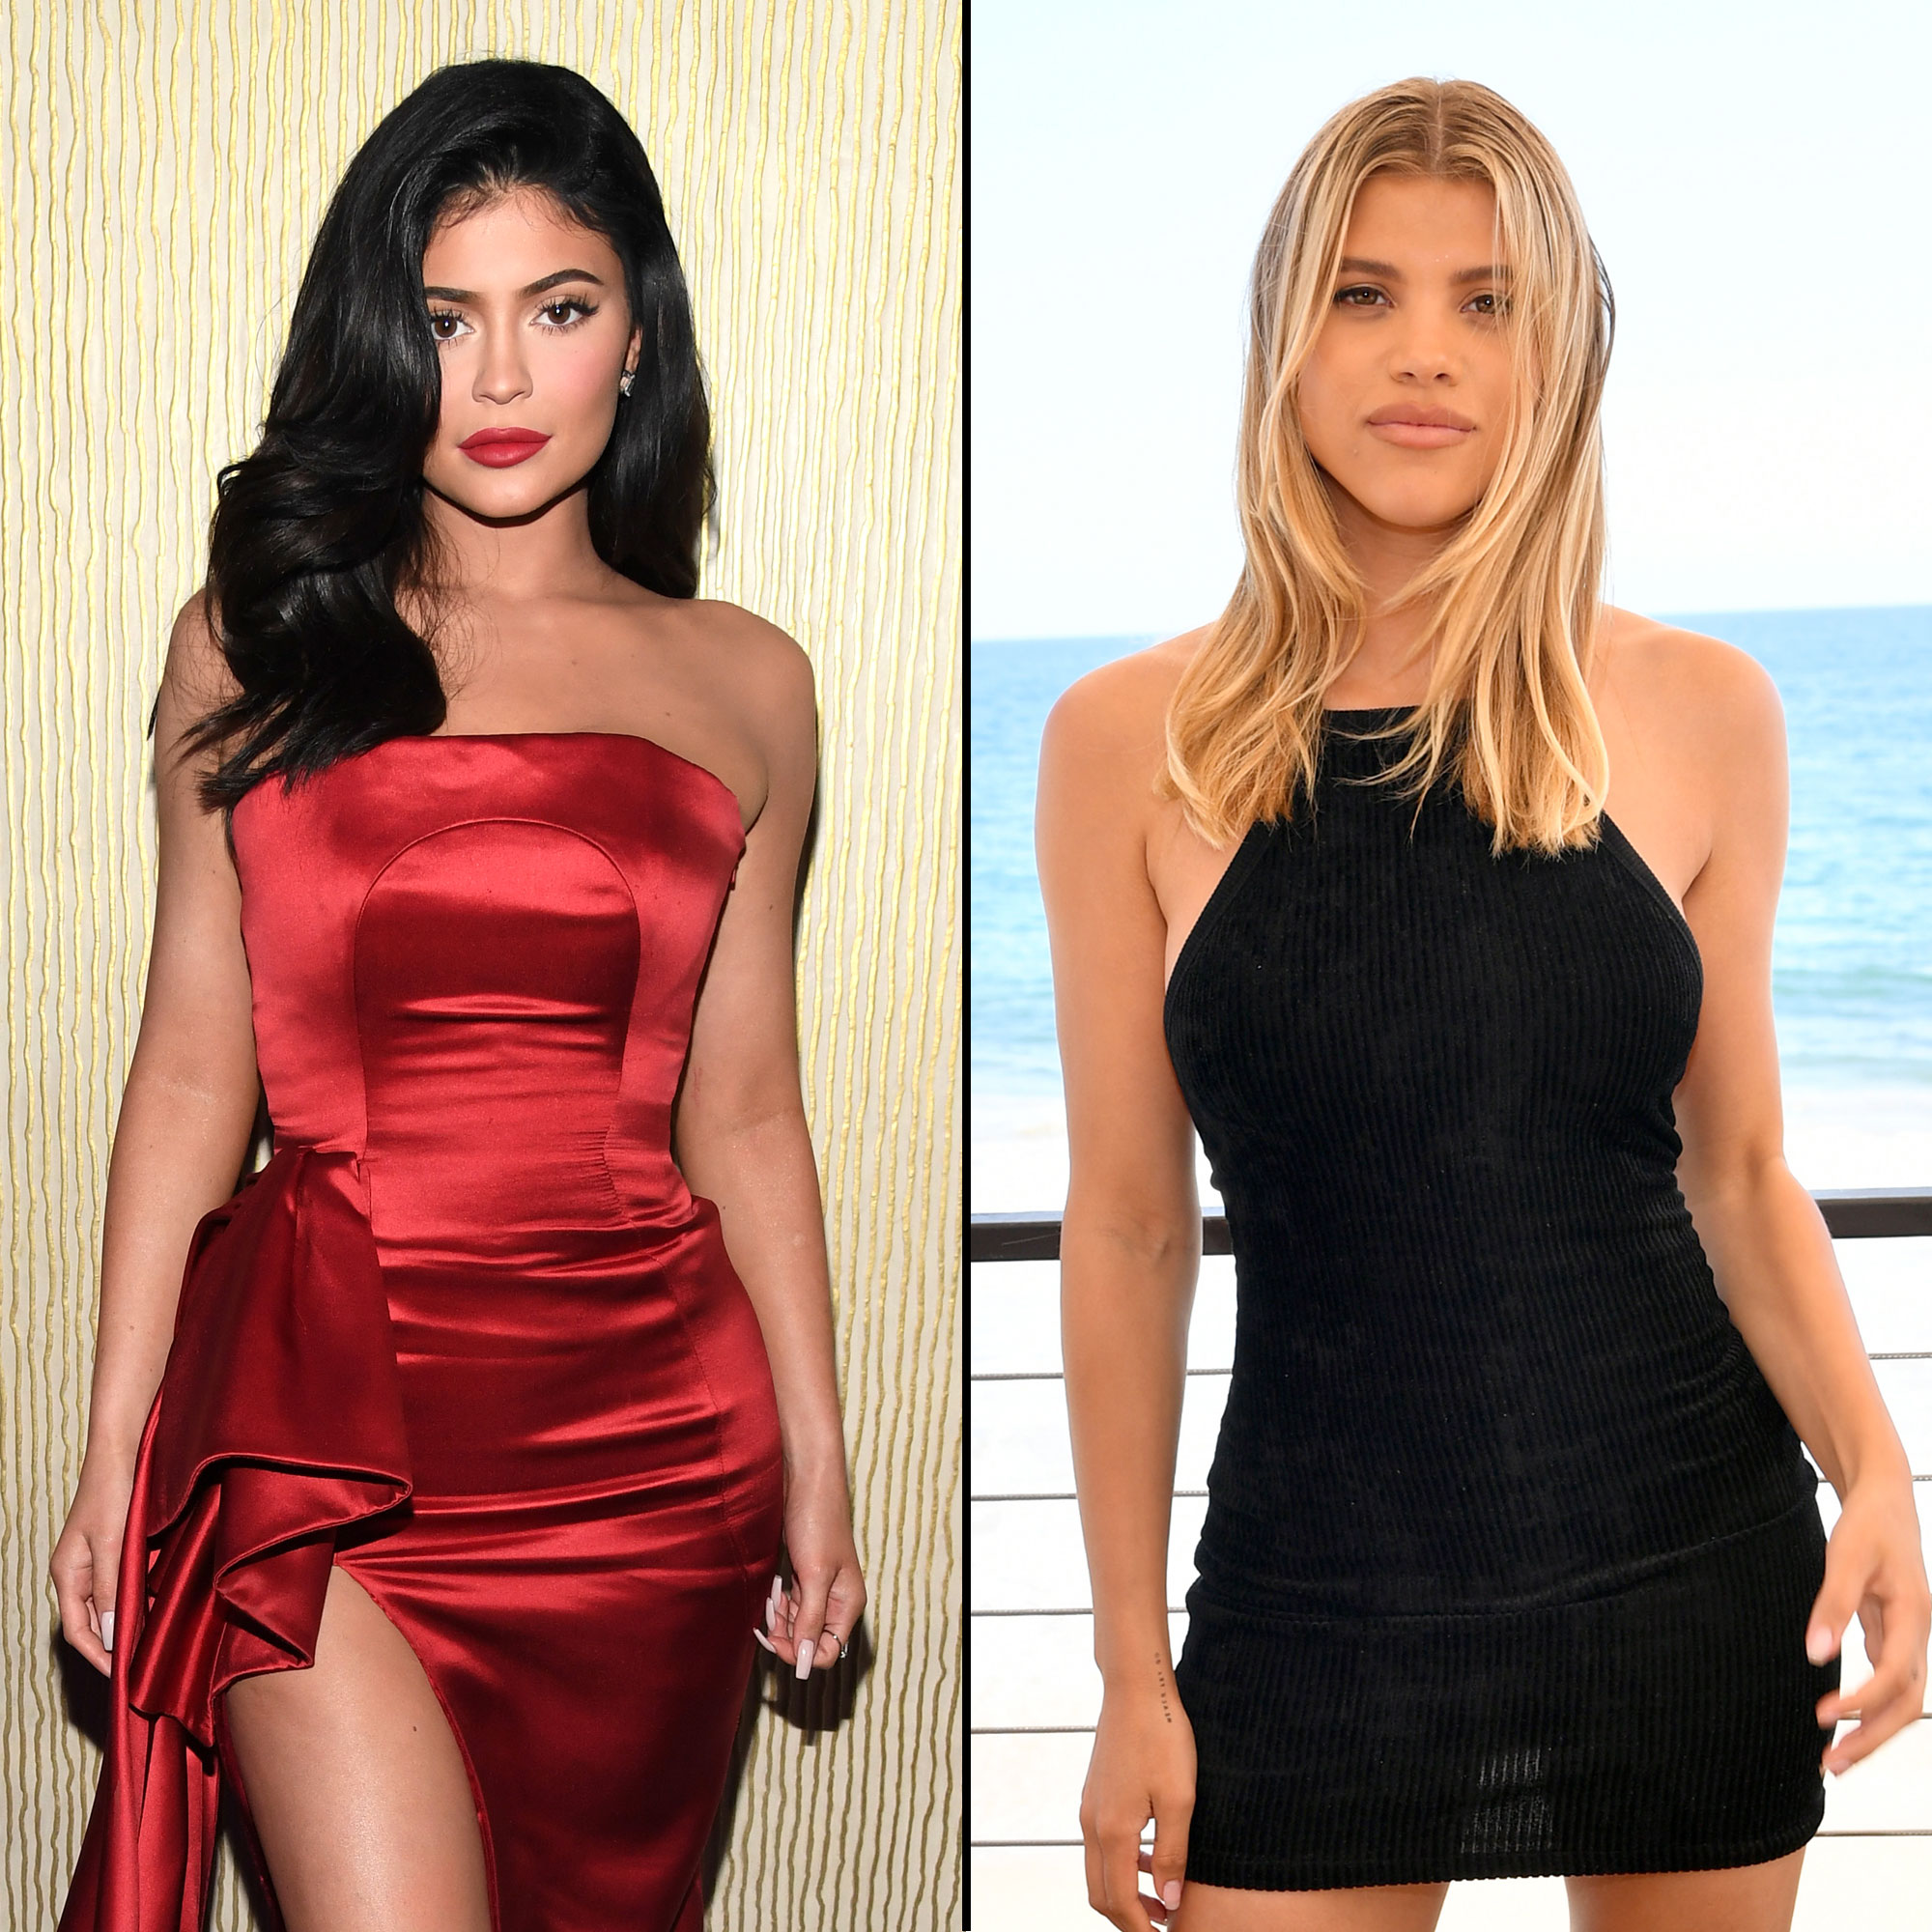 Group Of Tiny Teens - Kylie Jenner, Sofia Richie Pose Nude During Girls' Trip